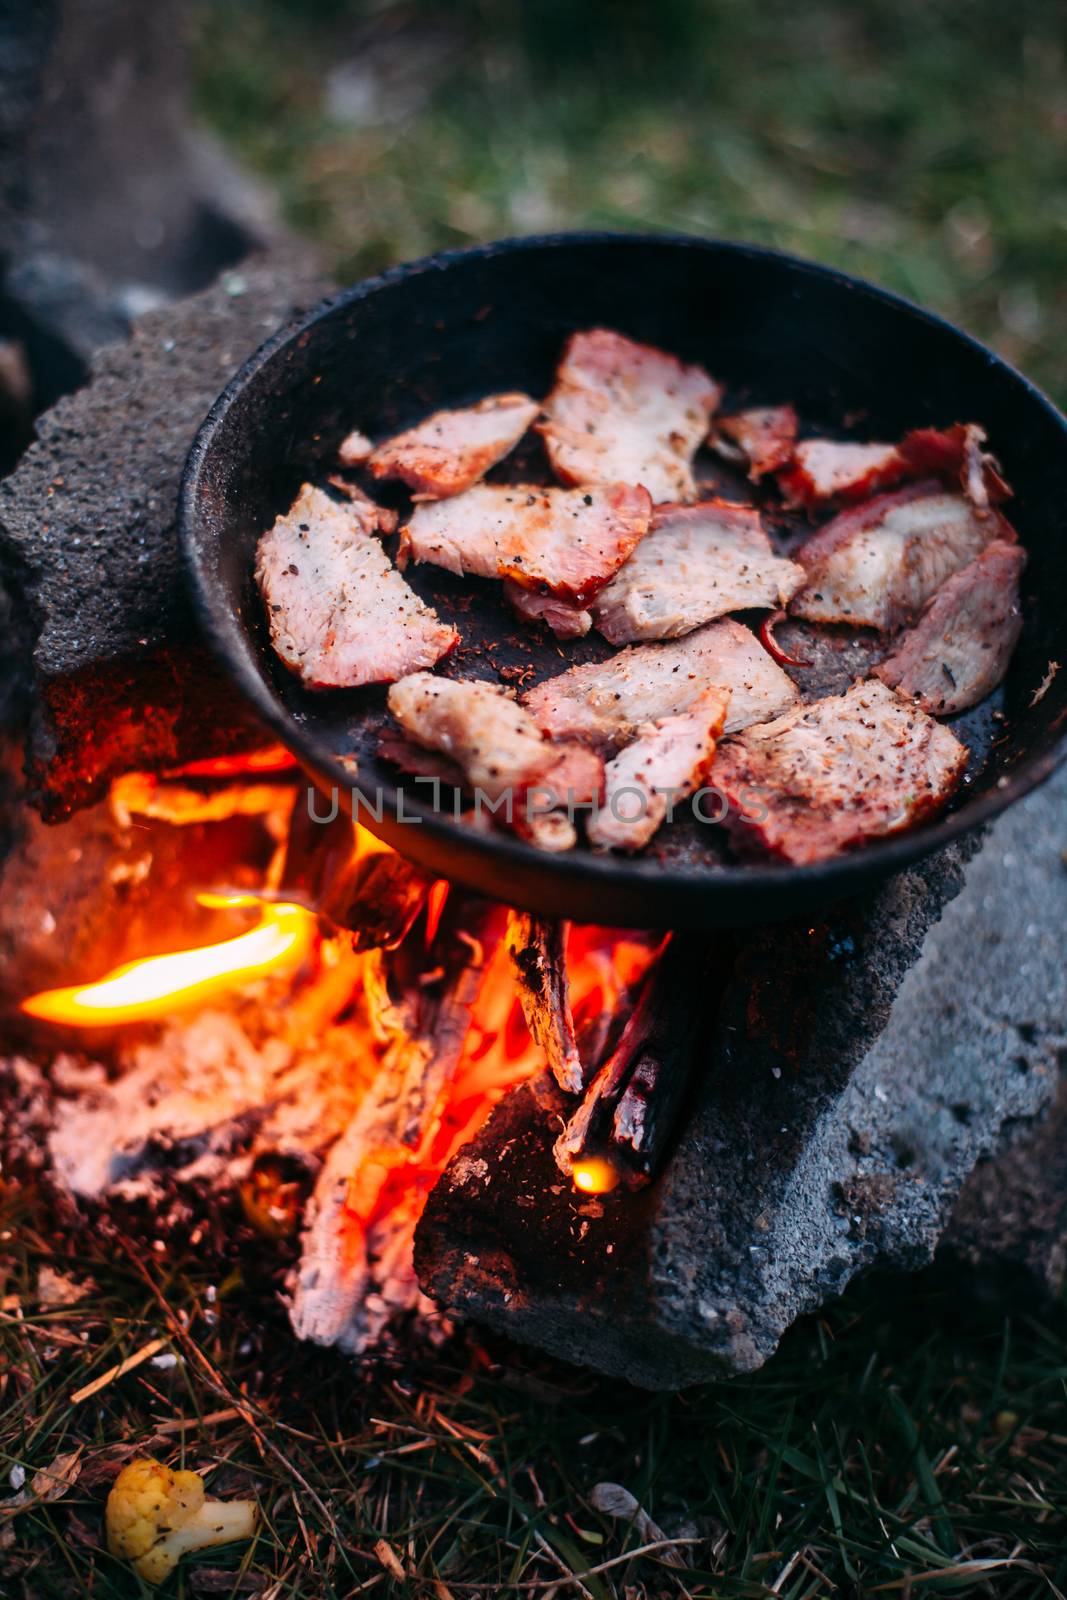 Slices of fried bacon in a pan. Food in a forest camp. Cooking on fire. Picnic in the nature. Grilled food on nature.